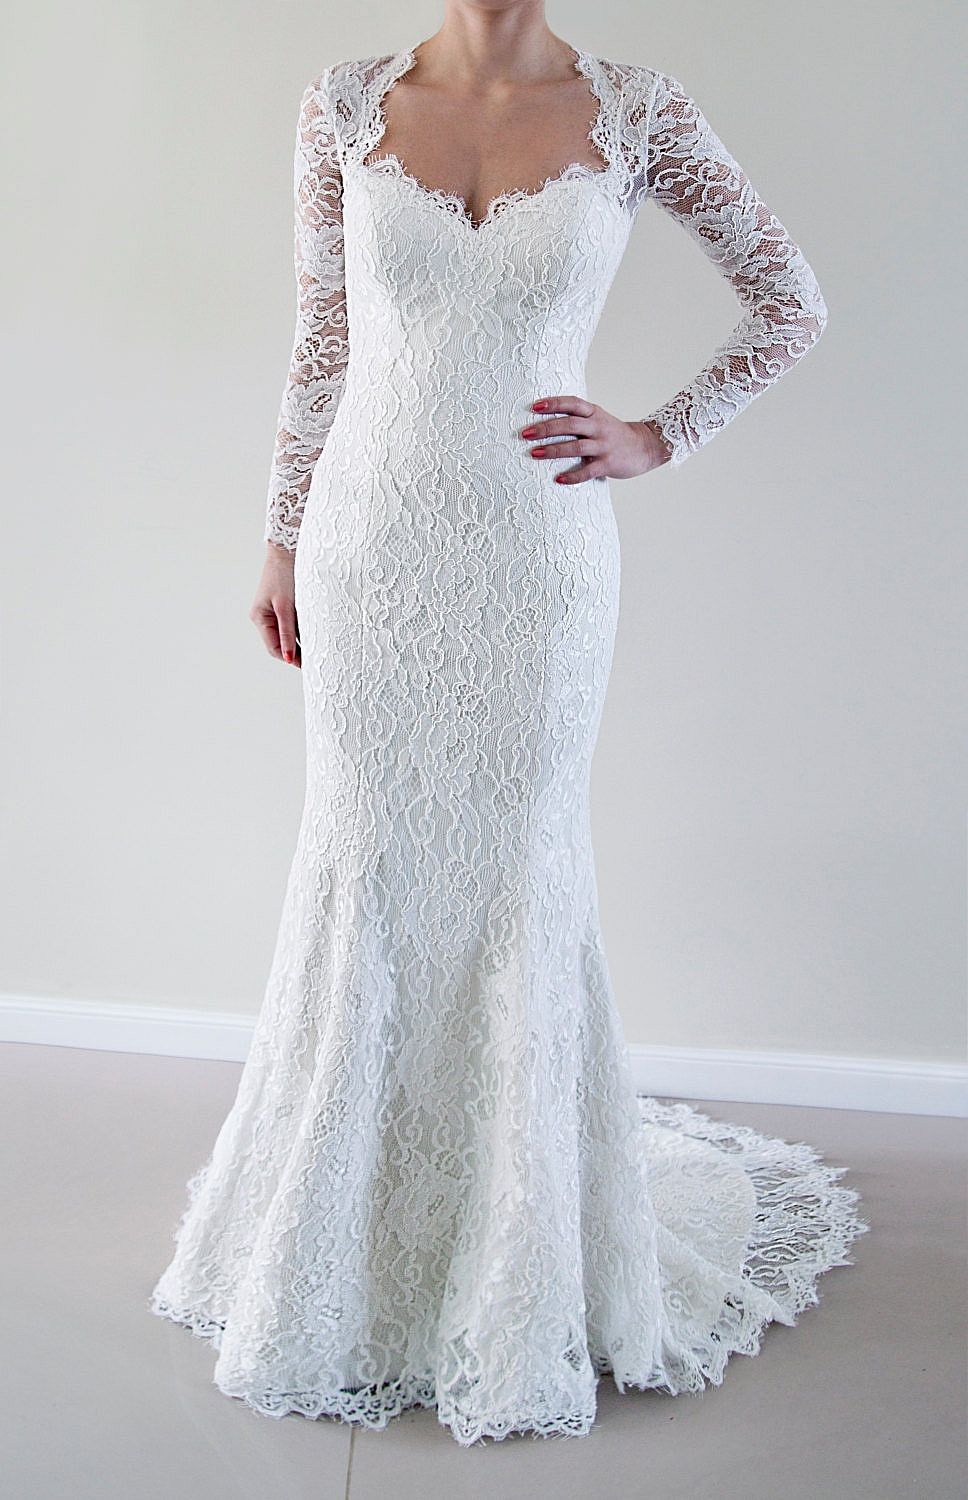 Simple and Elegant Lace Wedding Dress ...